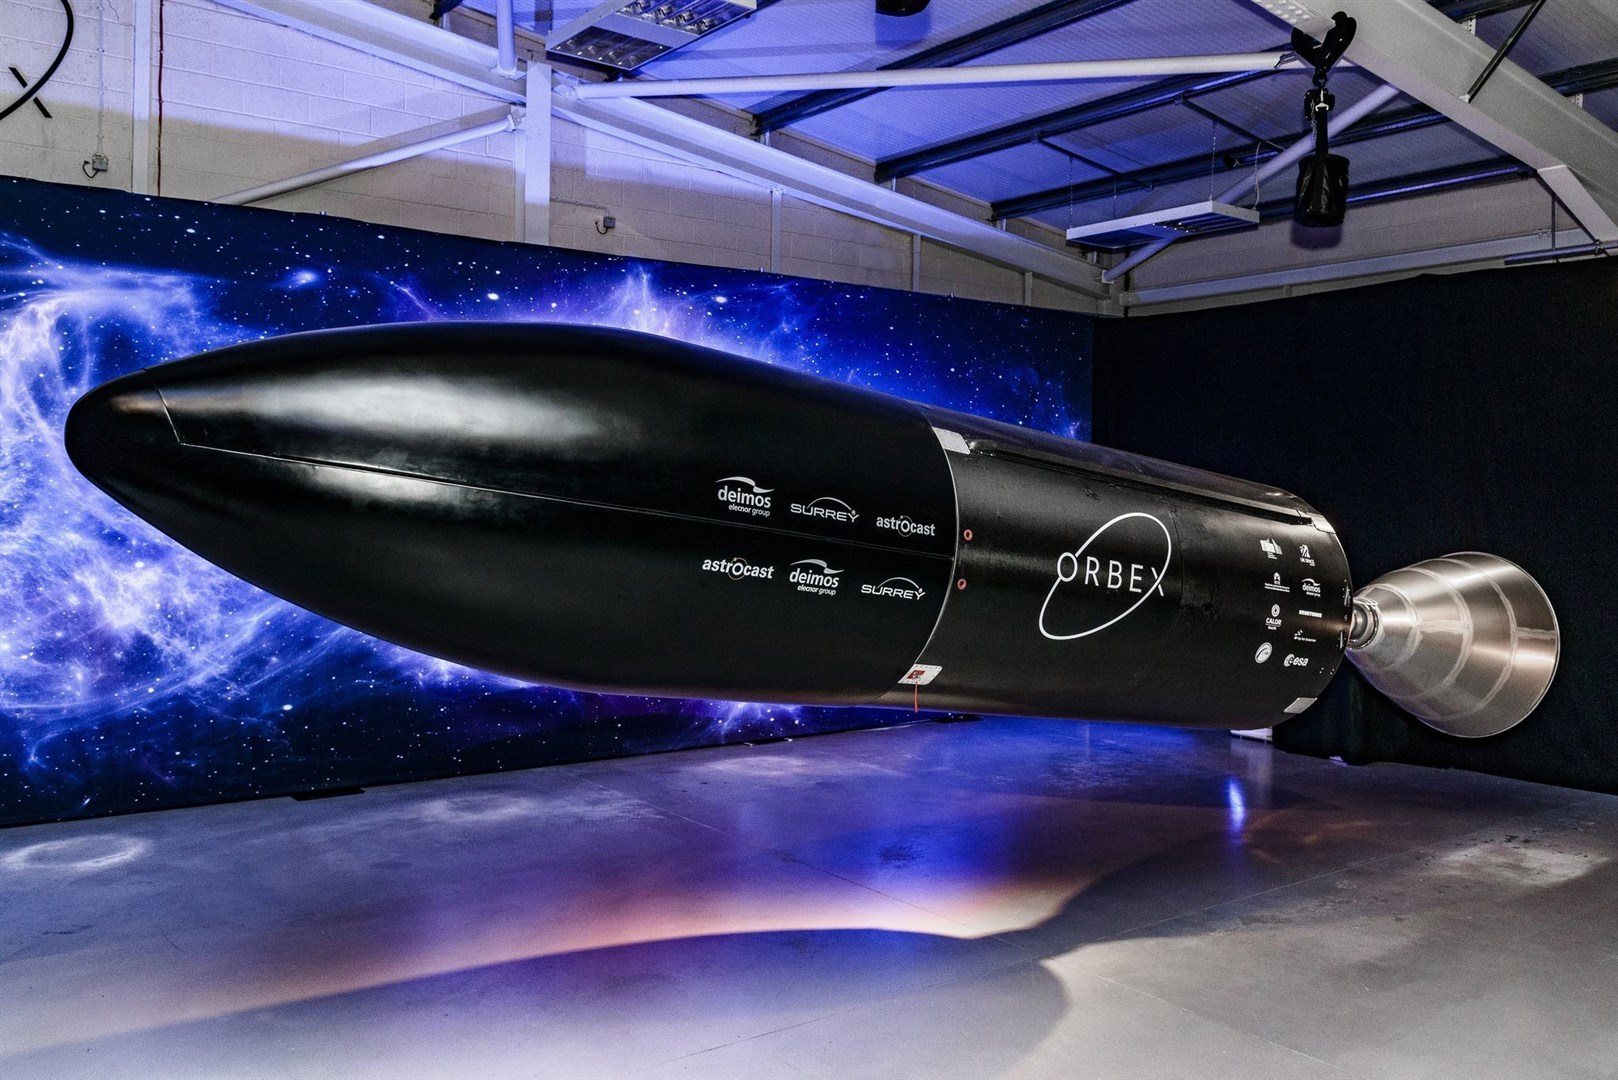 Orbex is developing a small commercial orbital rocket called Prime. Picture: Orbex